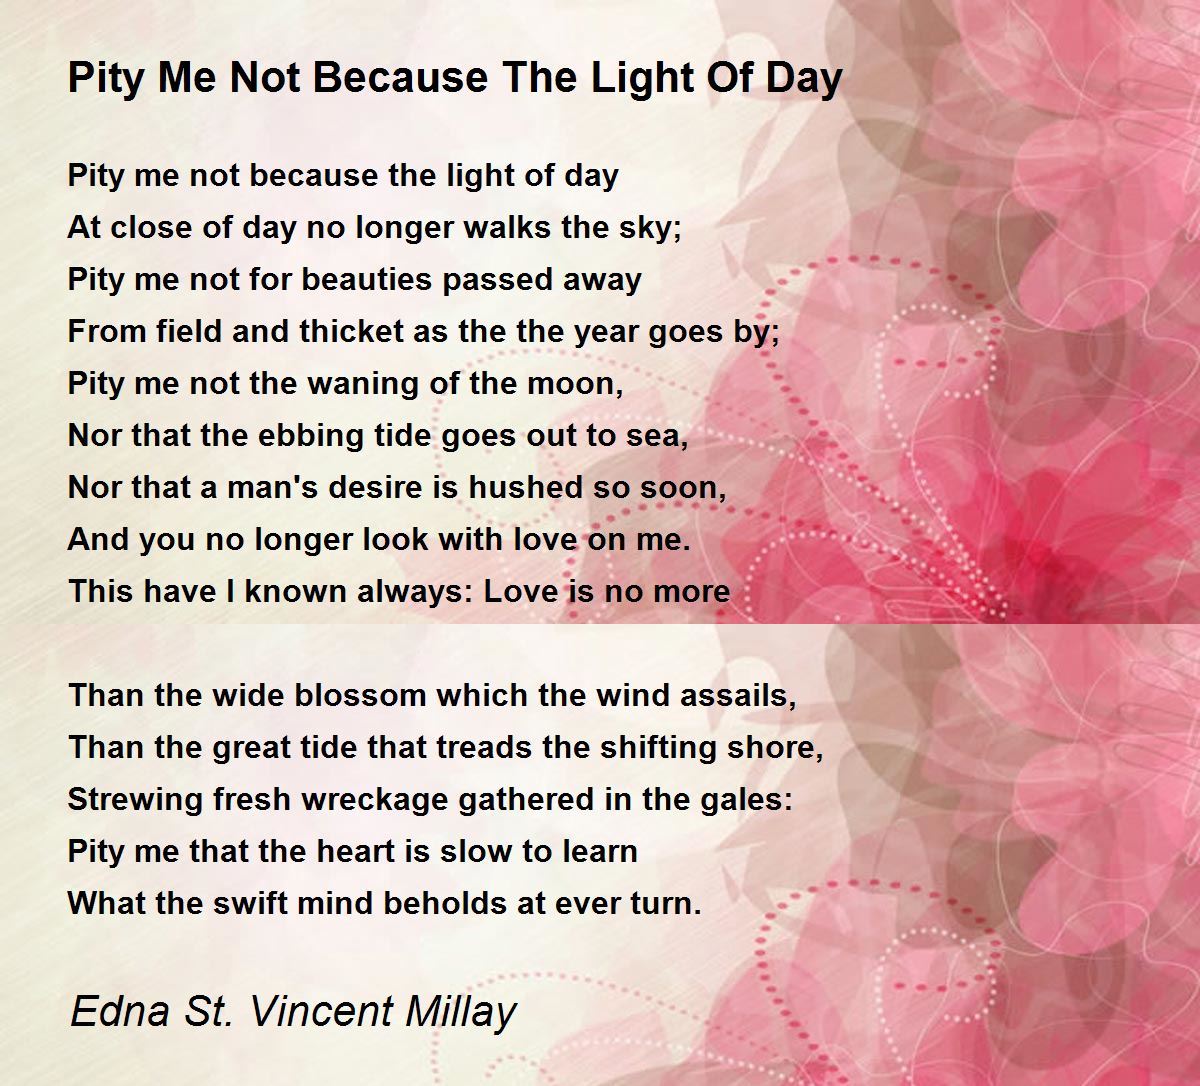 love is not all by edna st vincent